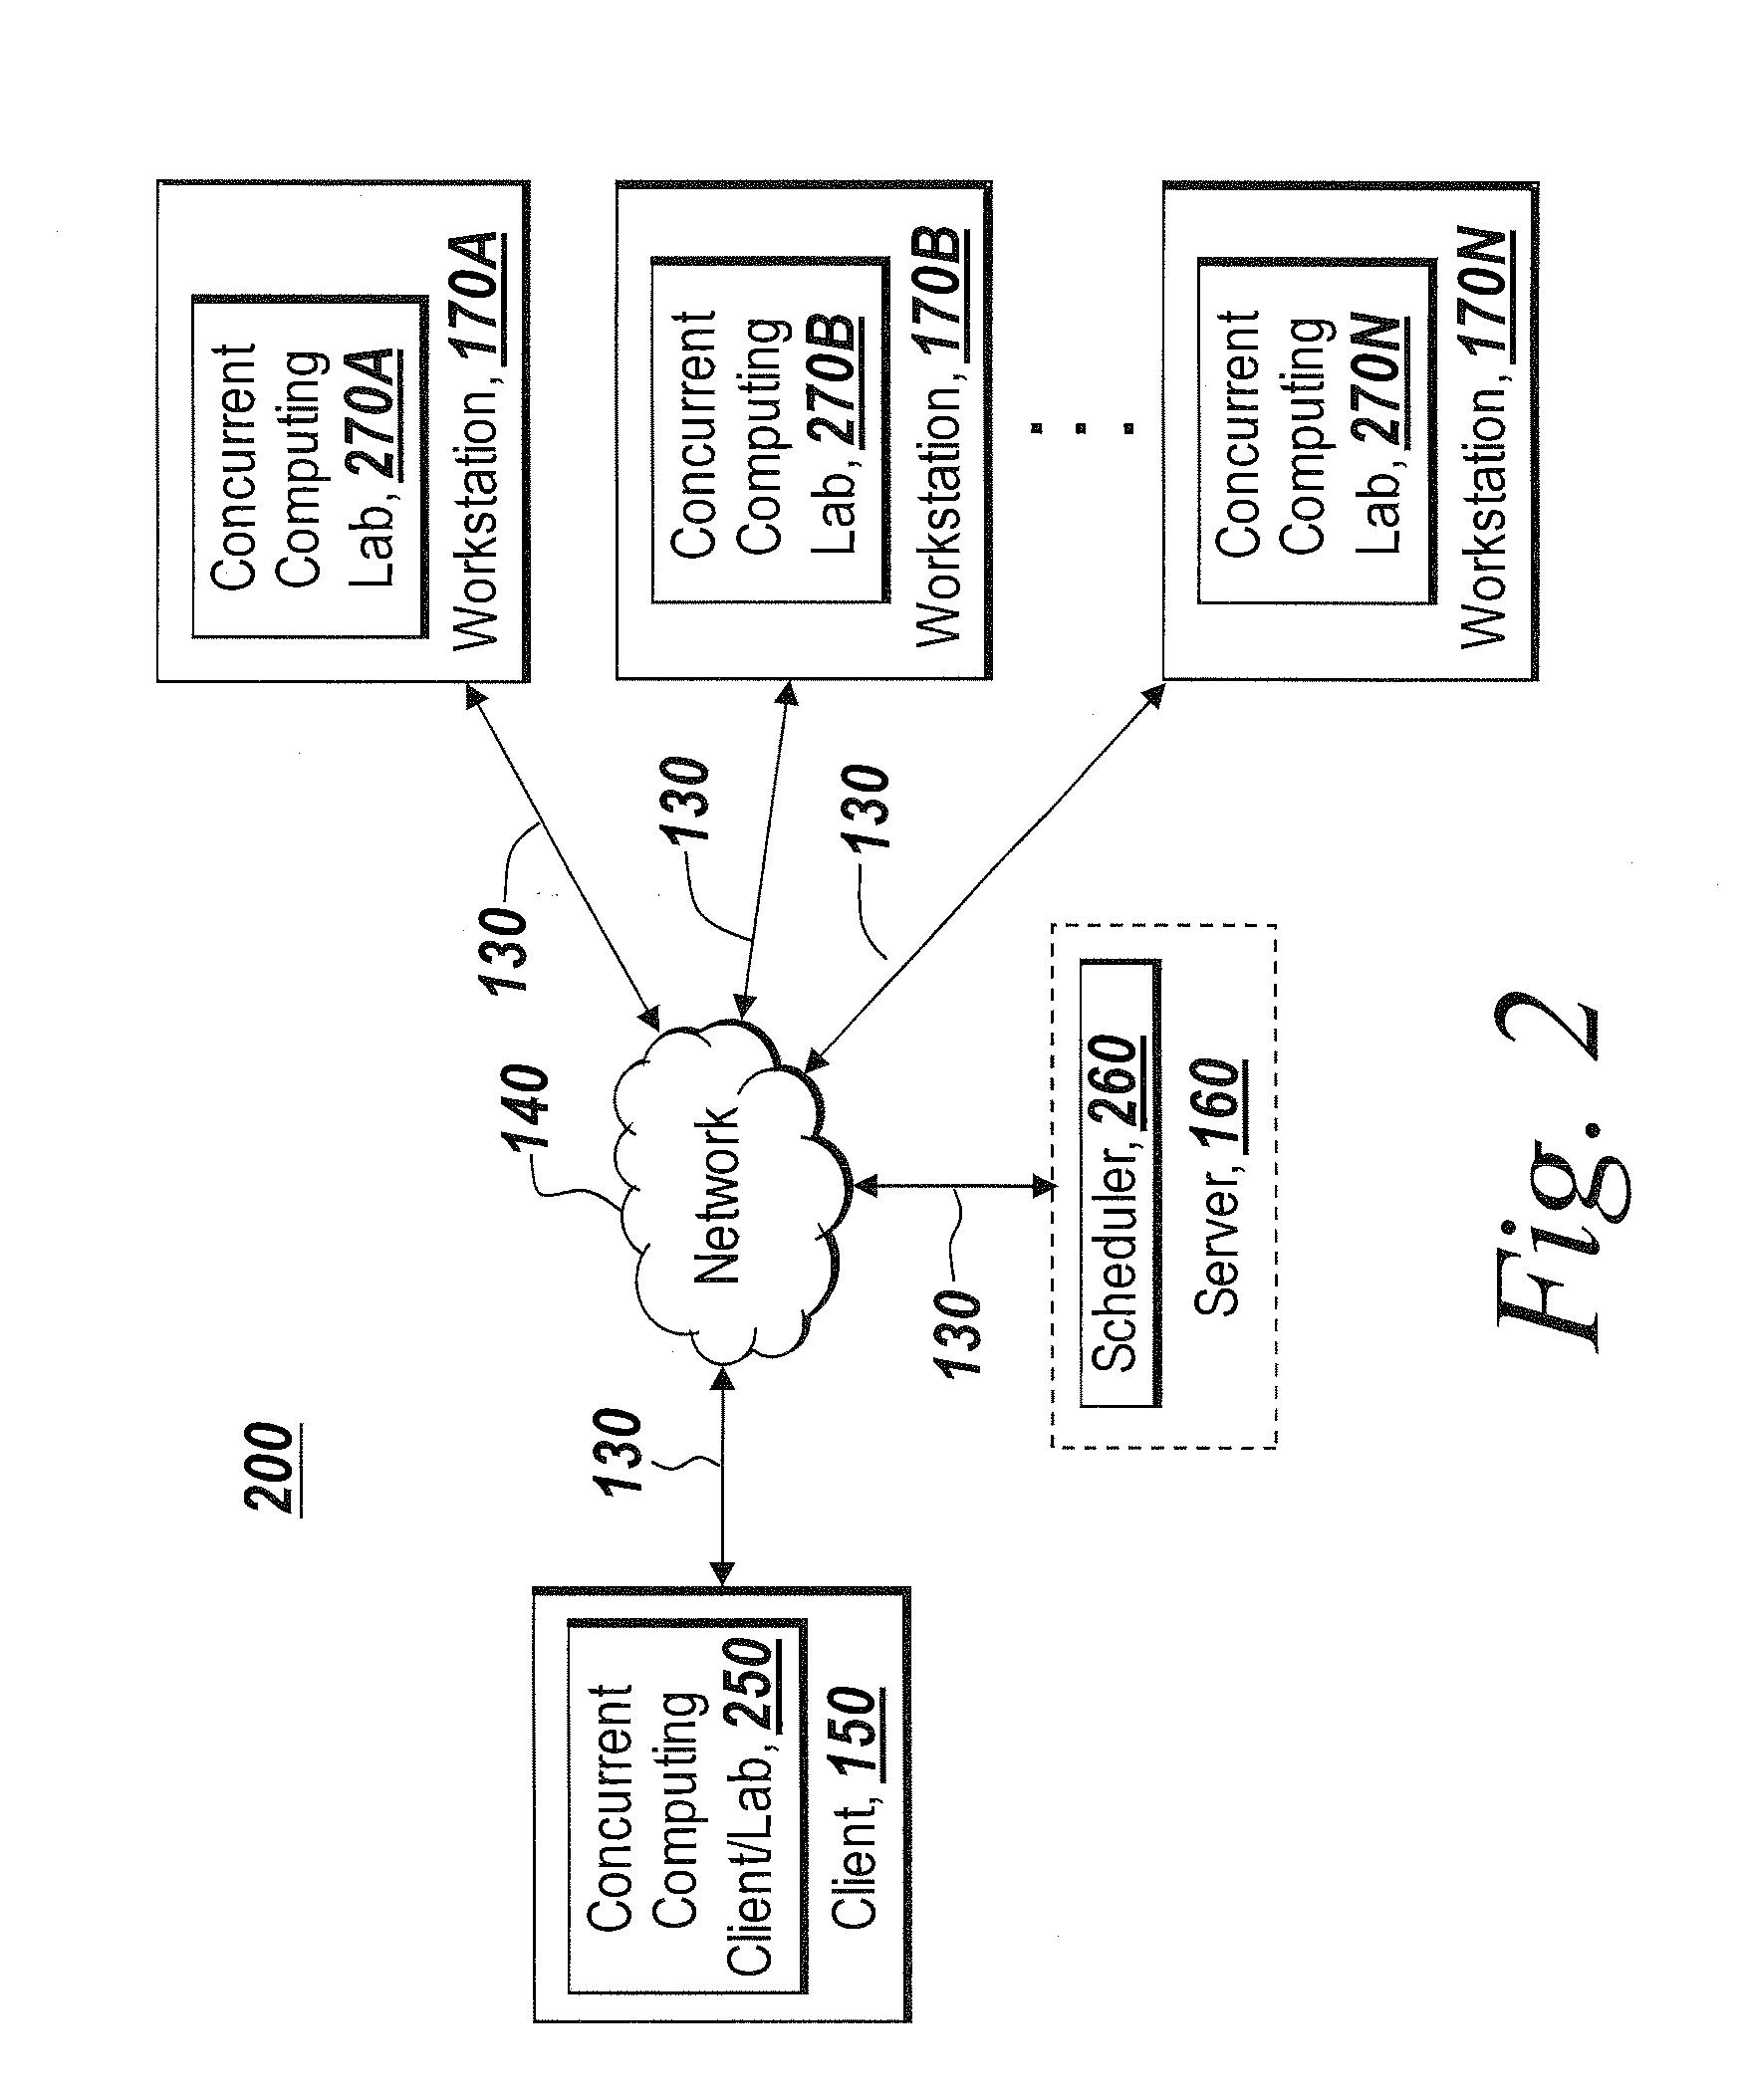 Dynamic definition for concurrent computing environments